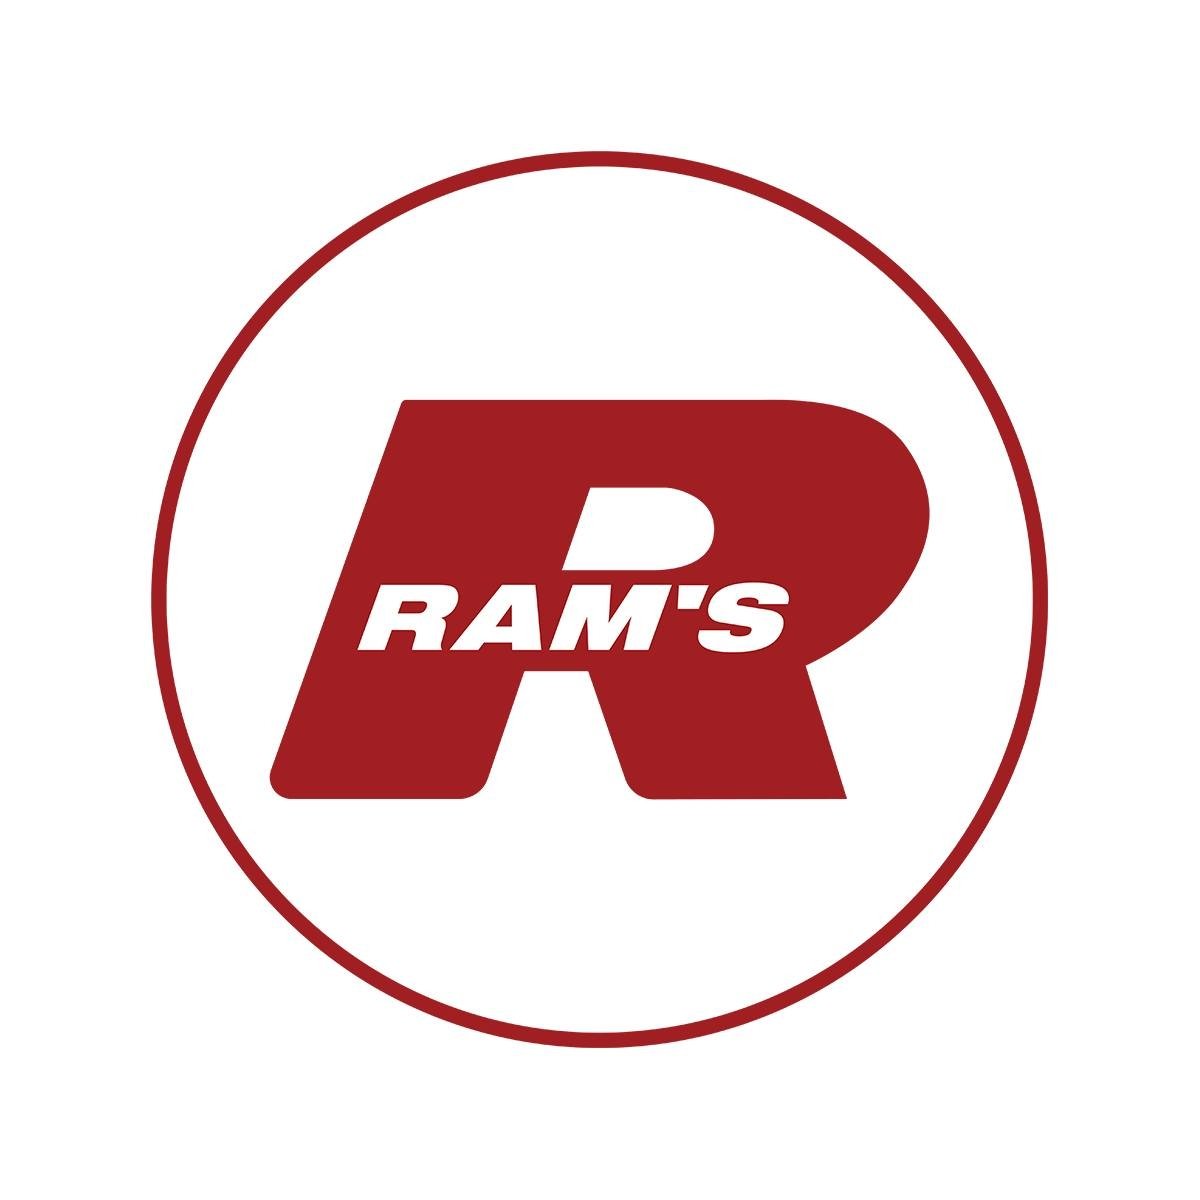 You are currently viewing Rams Trading Ltd. issues alert on suspected counterfeit alcoholic Beverages